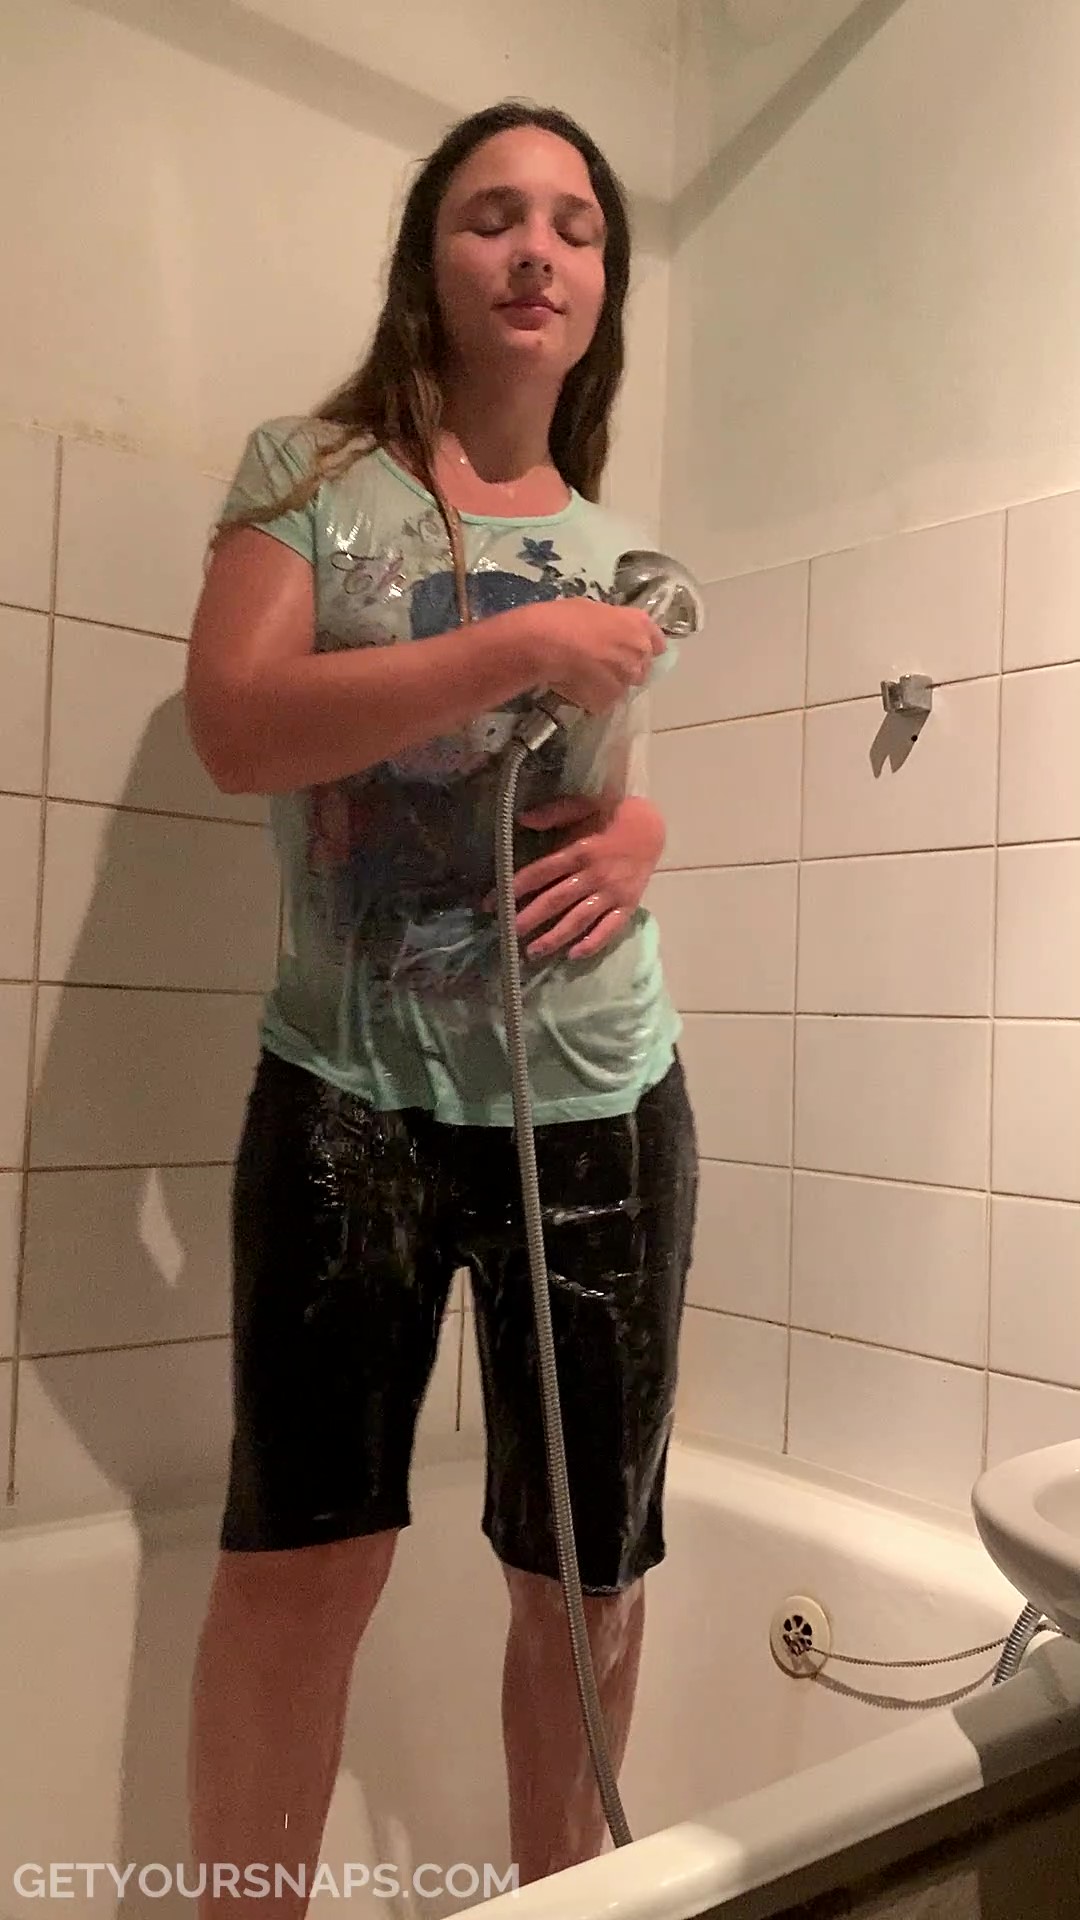 Violet takes a shower in clothed again - frame at 3m39s